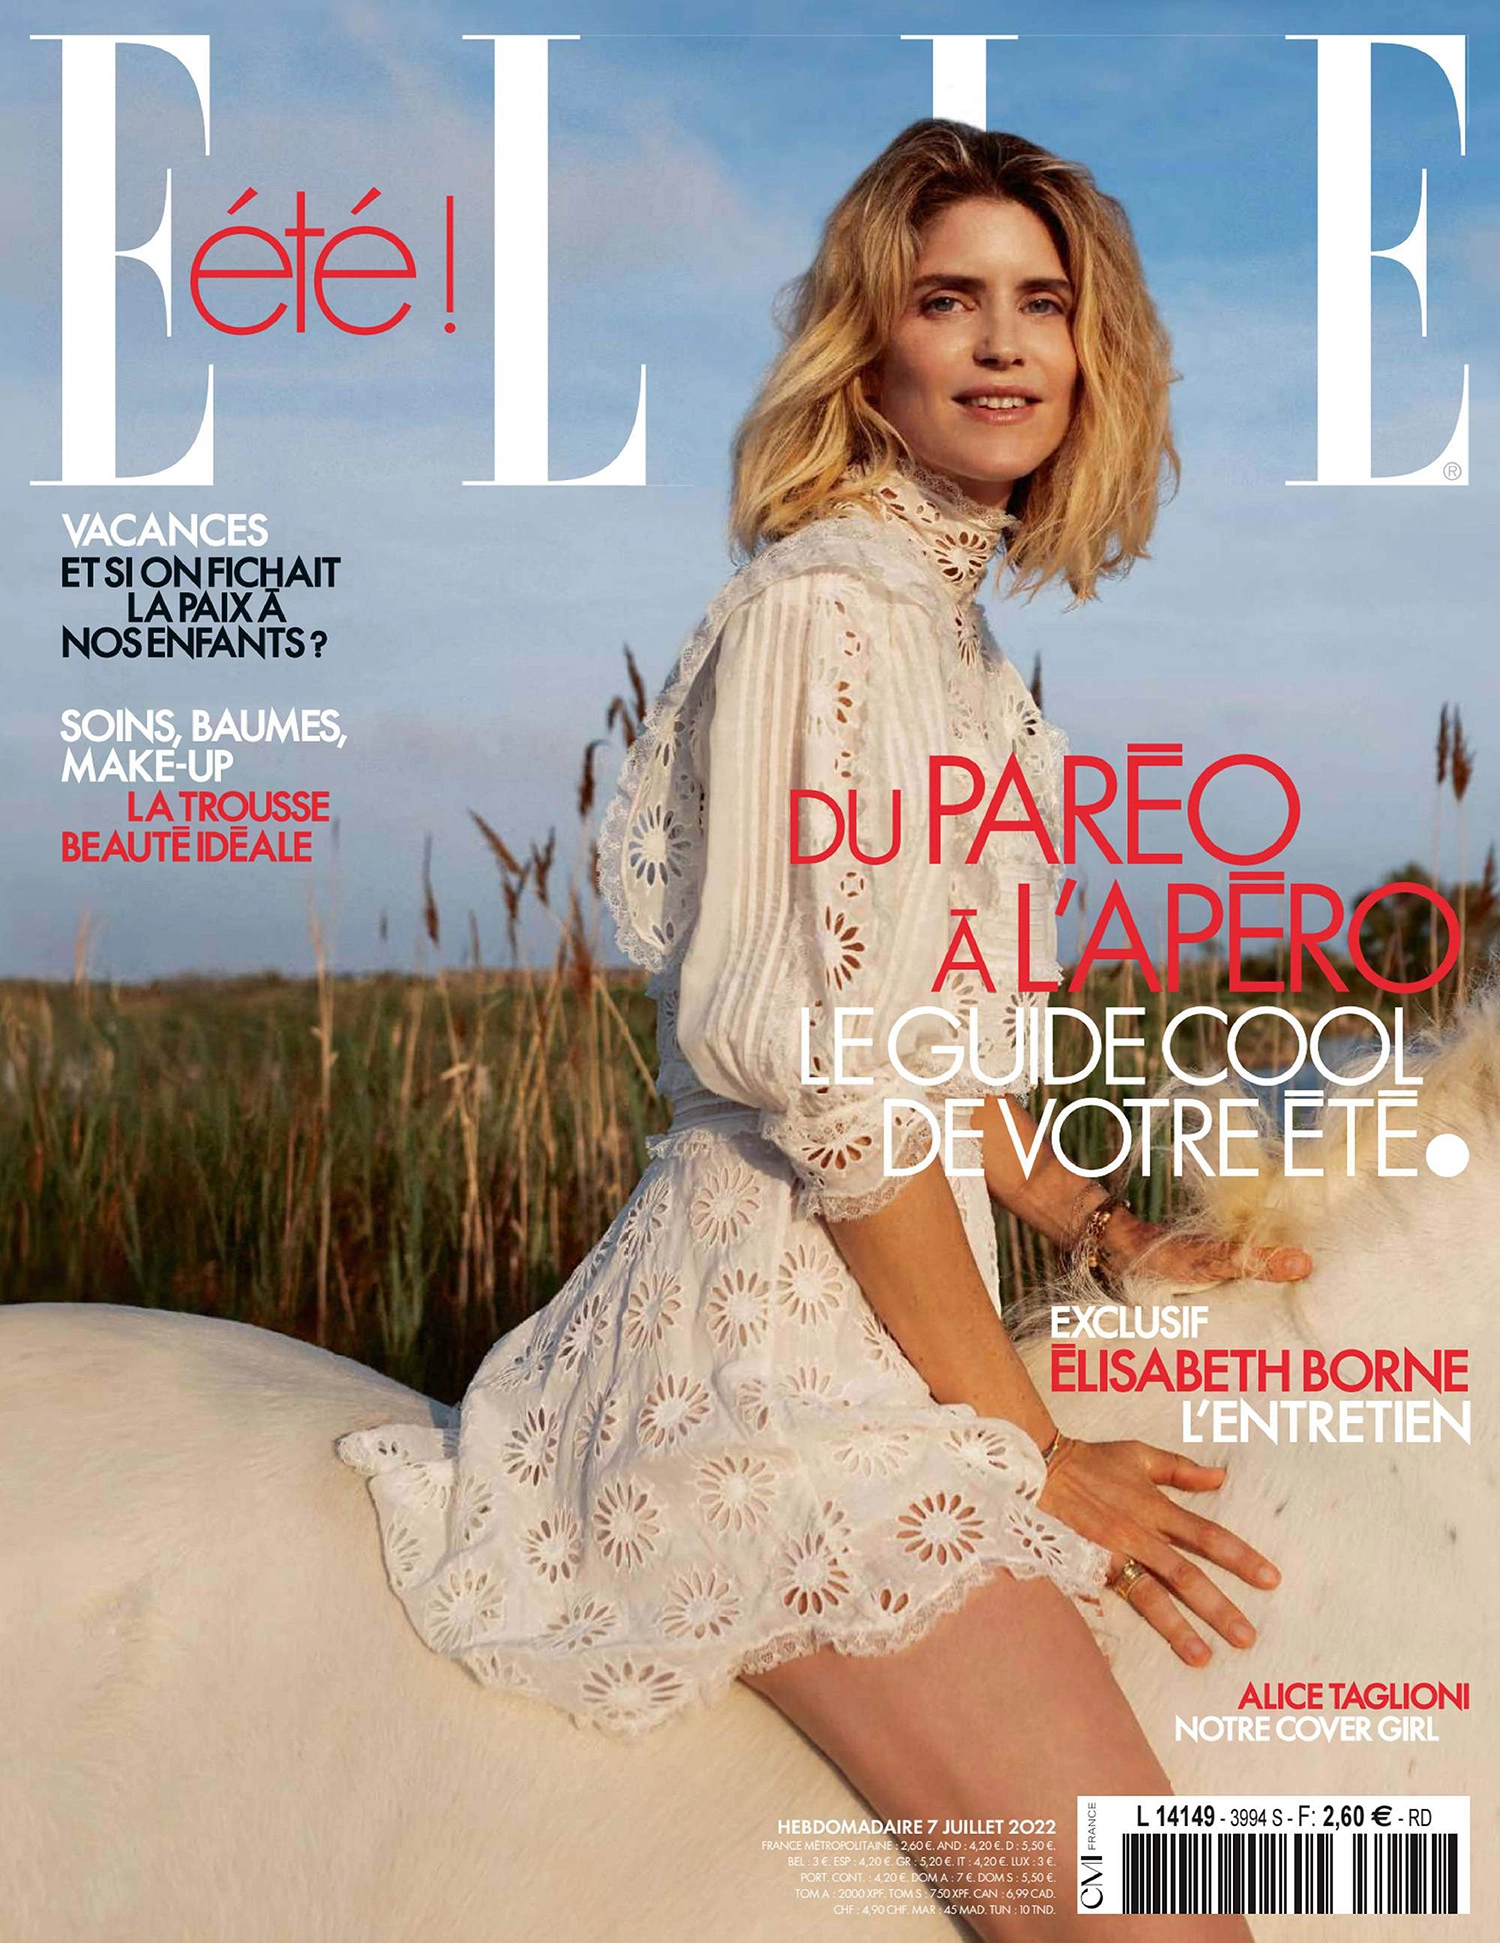 Alice Taglioni covers Elle France July 7th, 2022 by Jan Welters